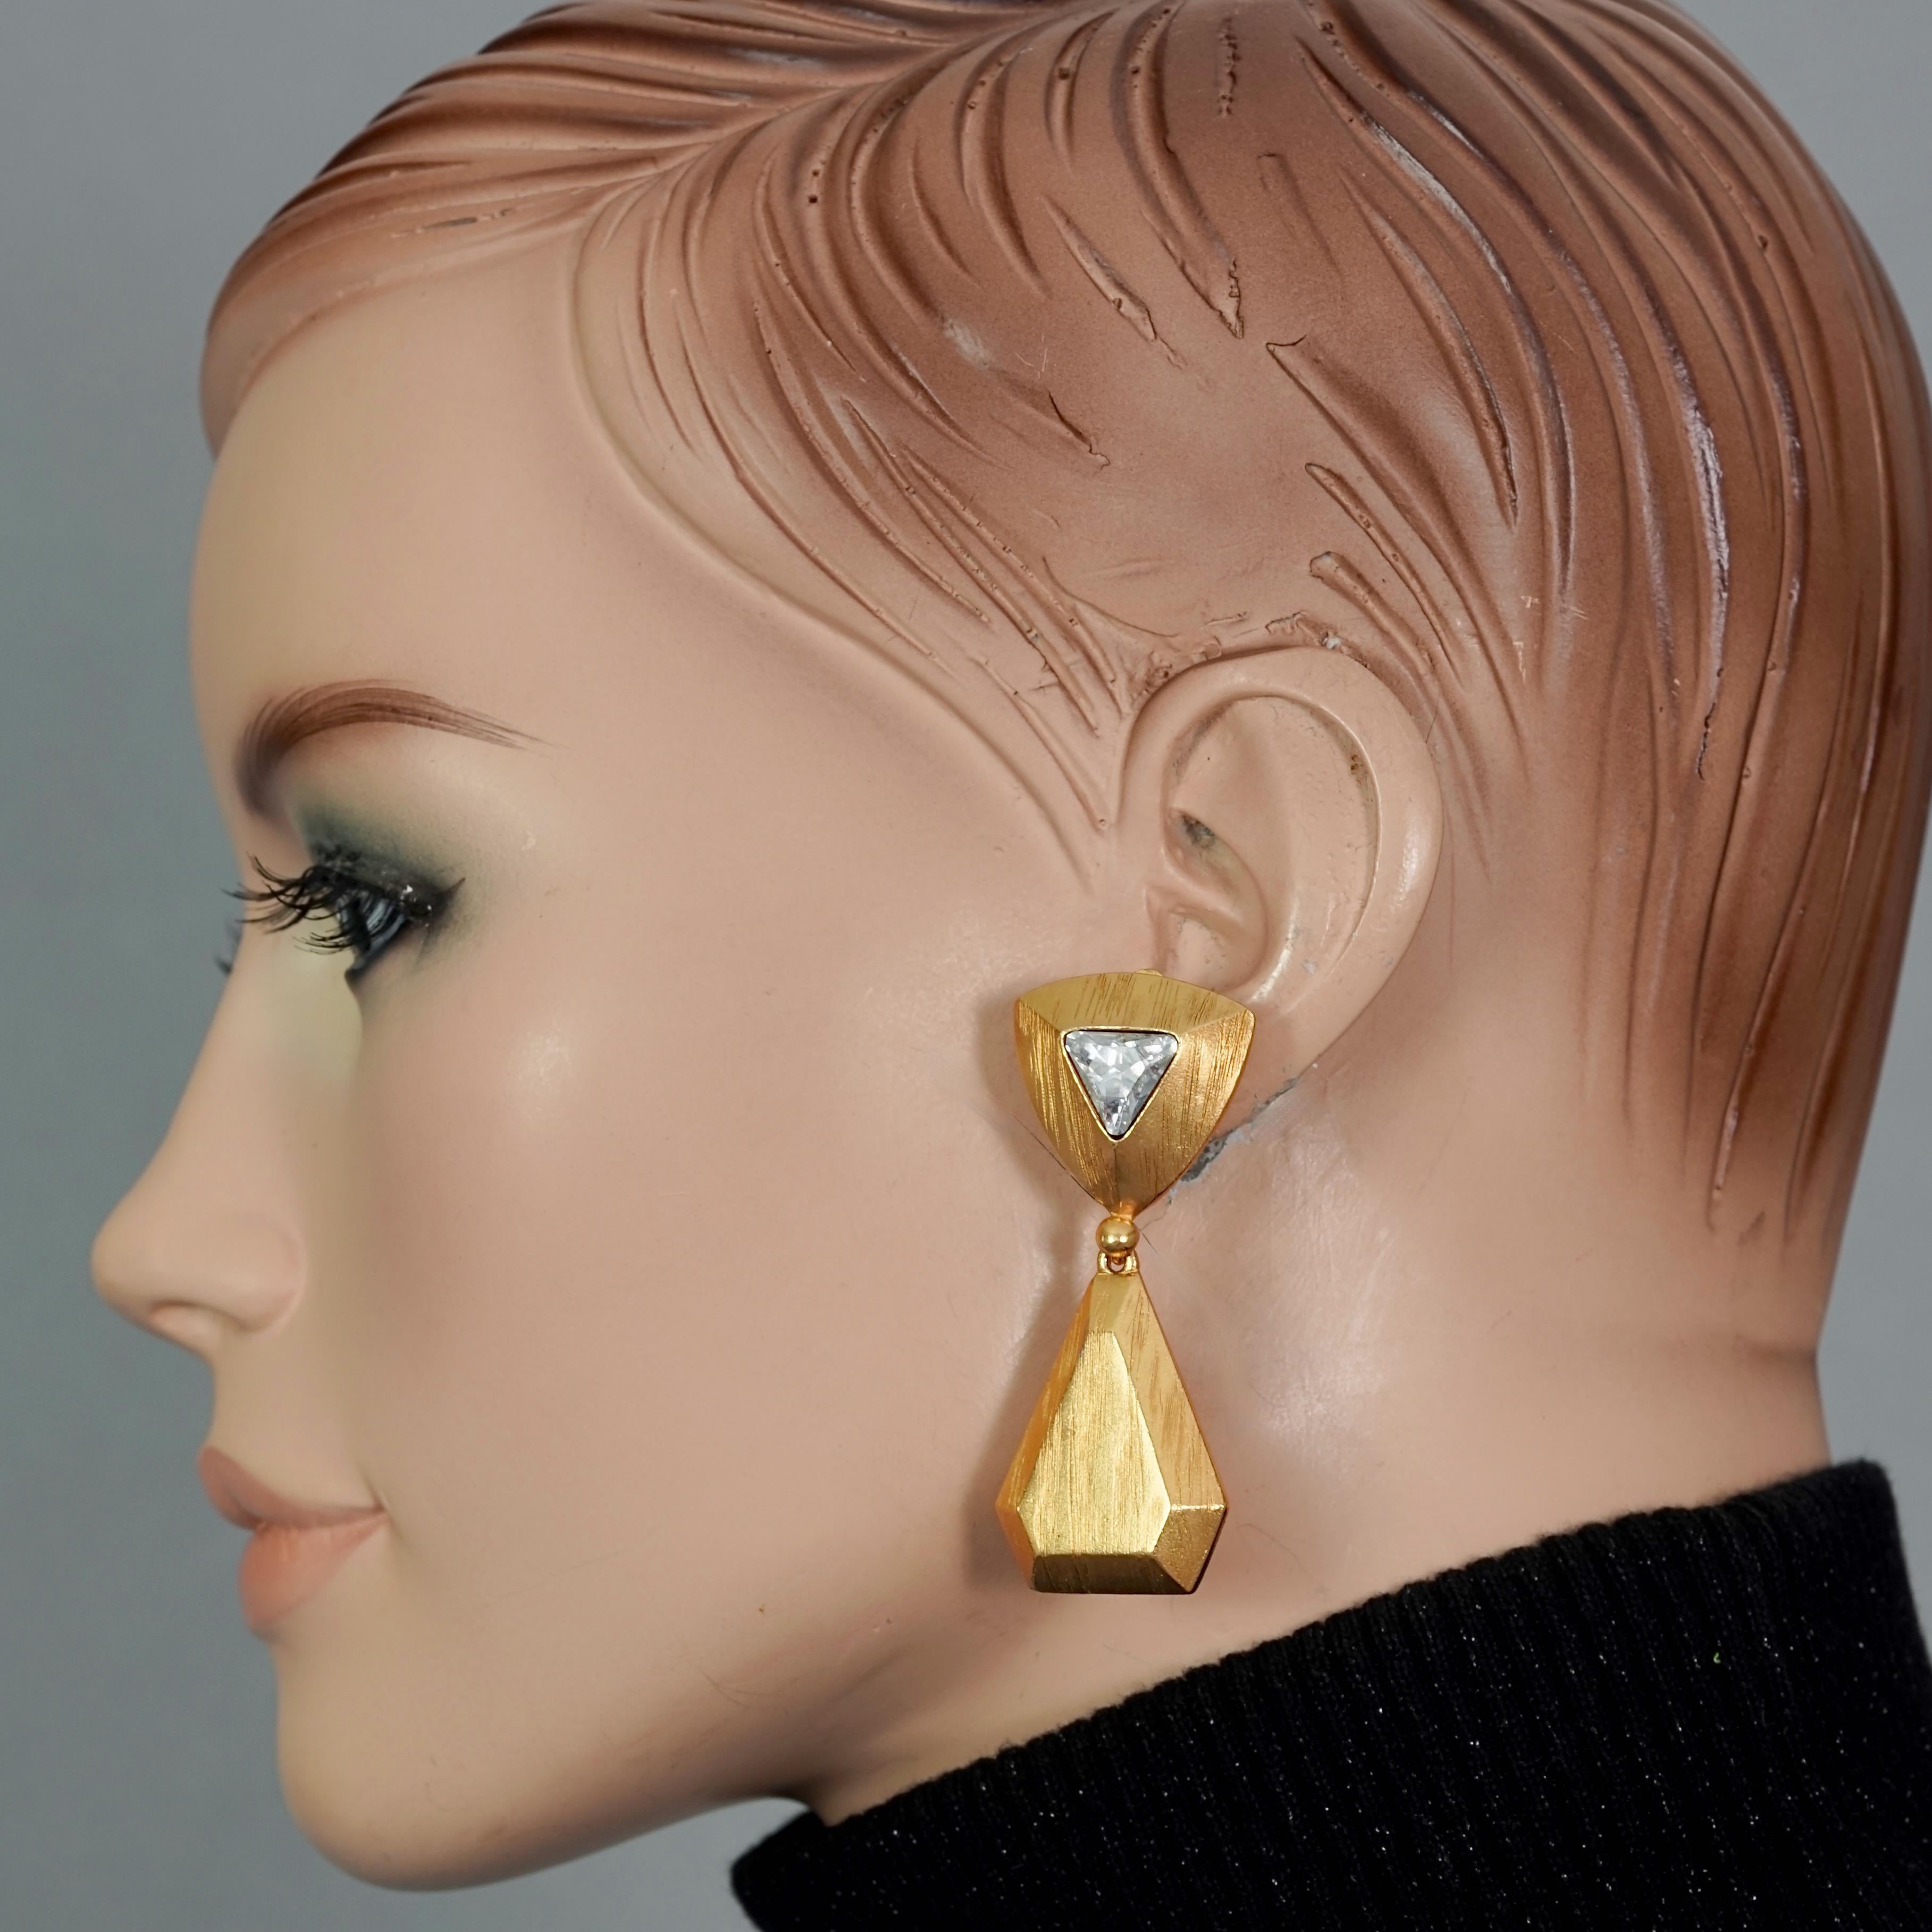 Vintage YVES SAINT LAURENT Ysl Rhinestone Geometric Textured Drop Earrings

Measurements:
Height: 2.36 inches (6 cm)
Width: 1 inch (2.5 cm)
Weight per Earring: 17 grams

Features:
- 100% Authentic YVES SAINT LAURENT.
- Textured geometric drop